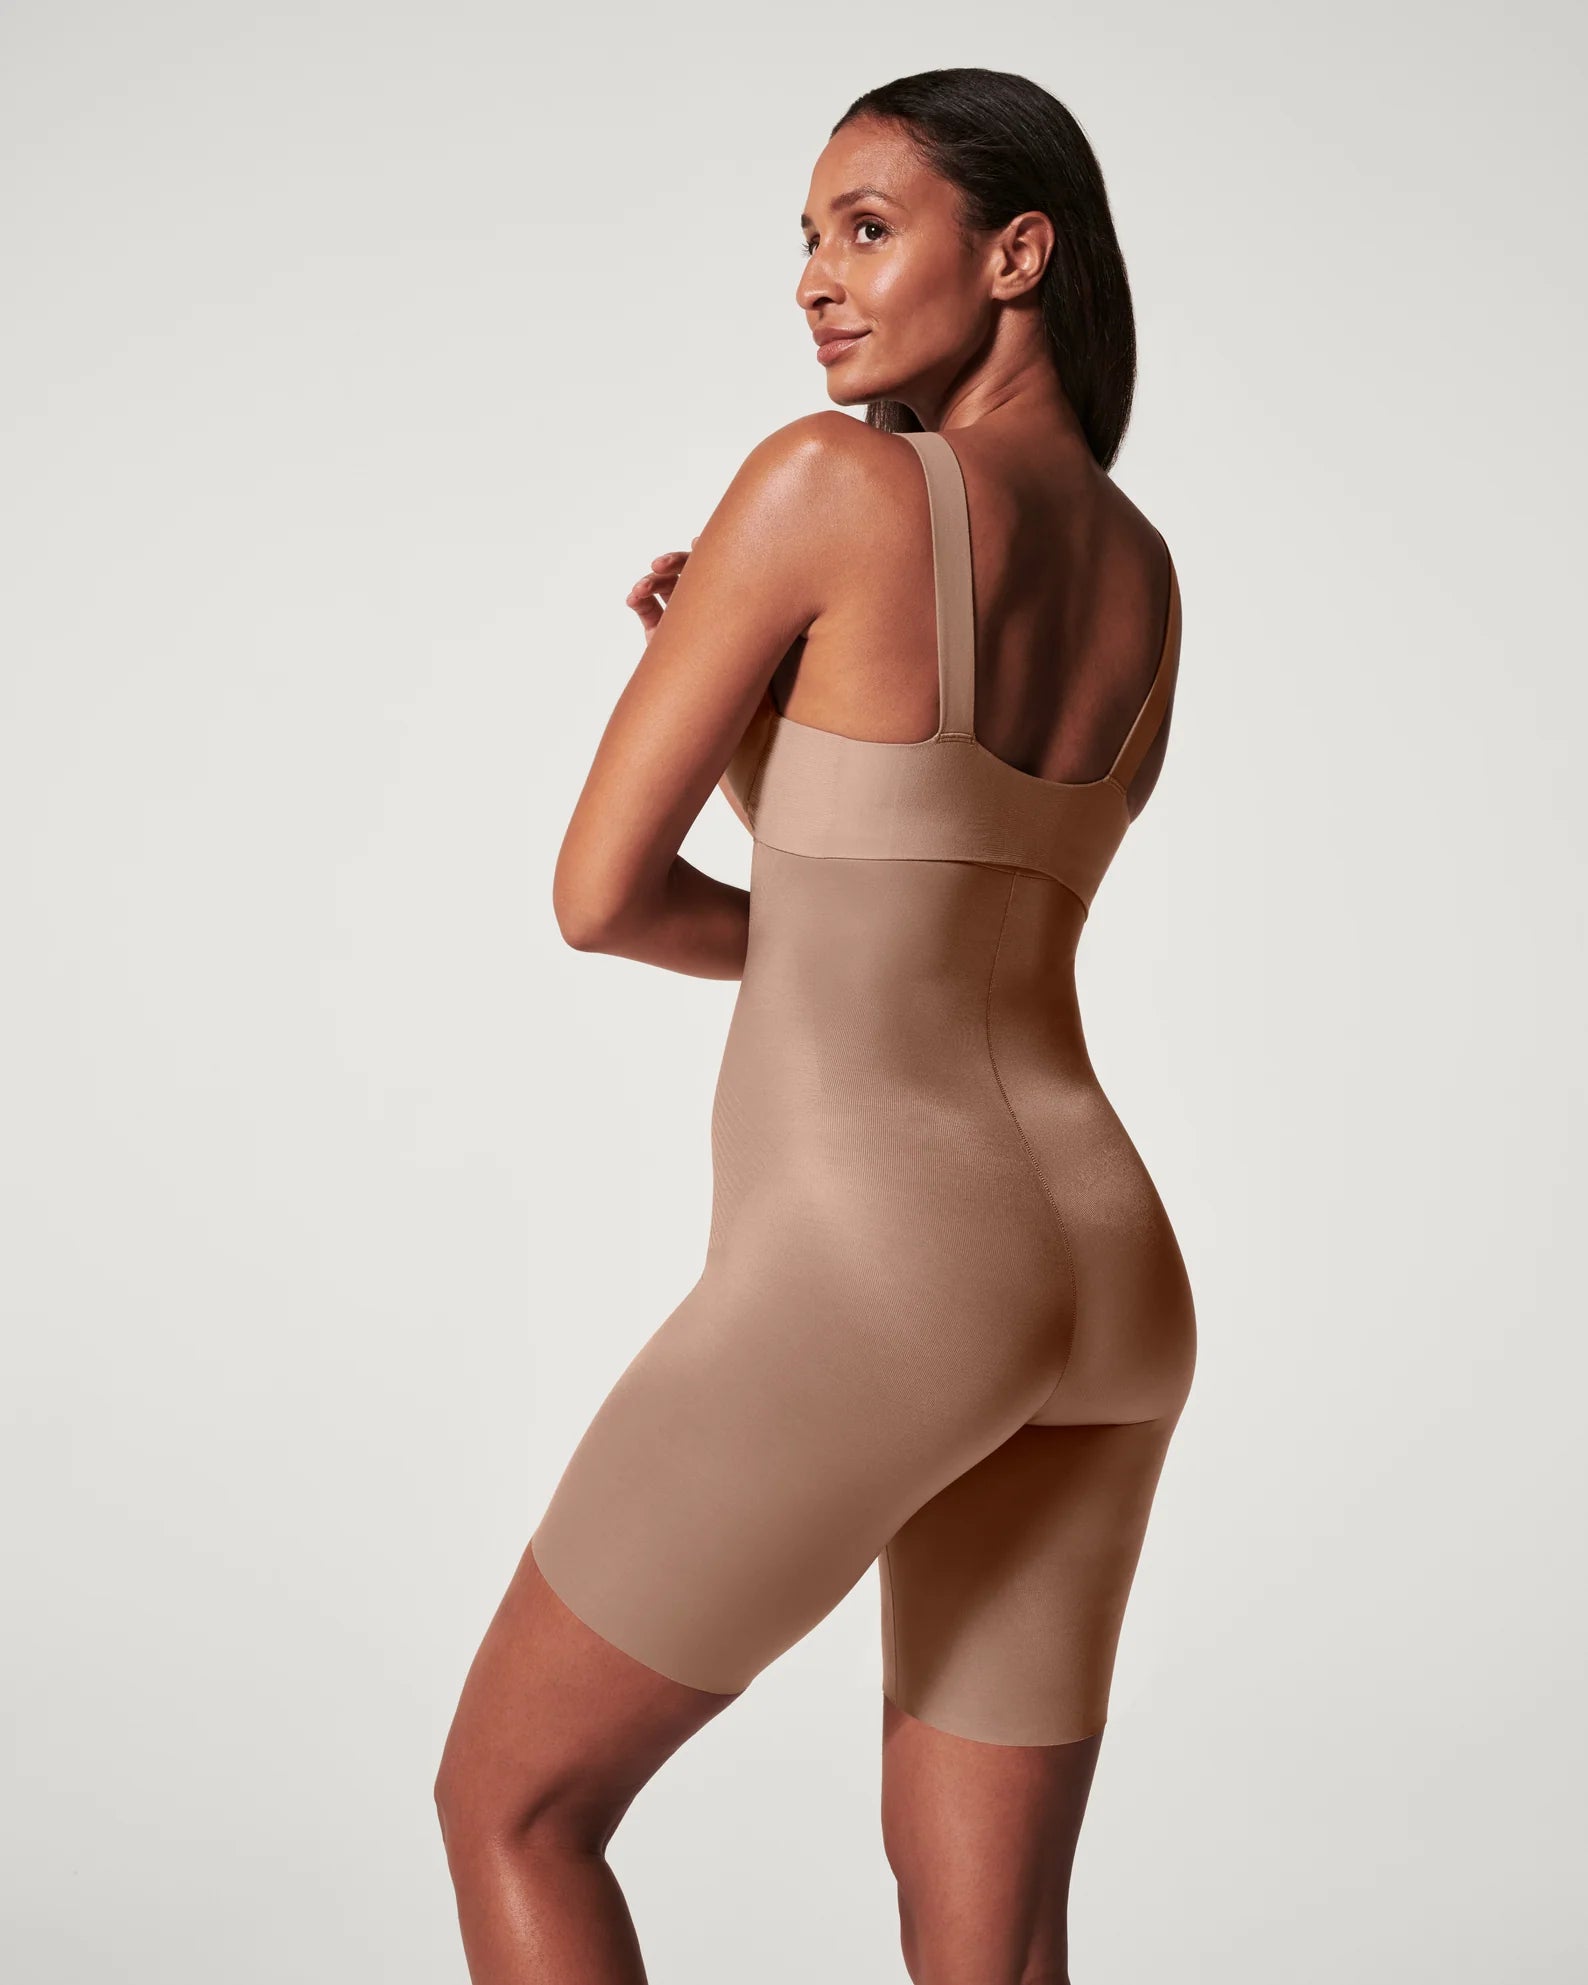 Shop Oline I Ellery and Moss I Spanx thinstincts 2.0 Mid-Thigh